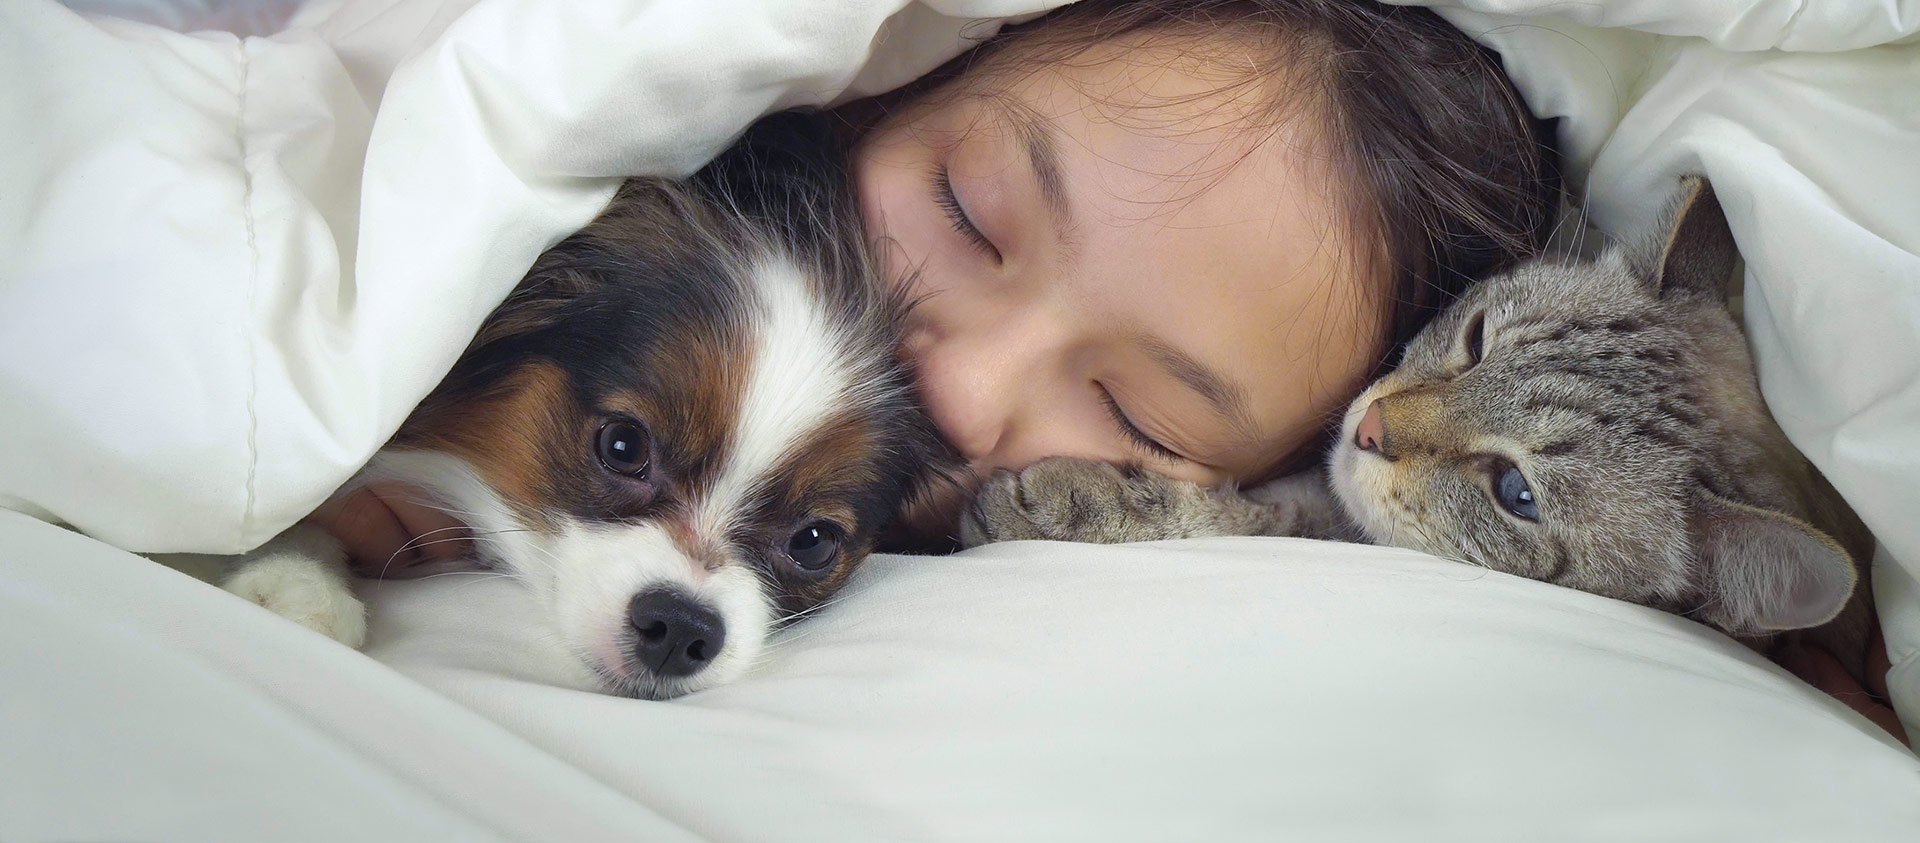 Girl in bed under covers with dog and cat